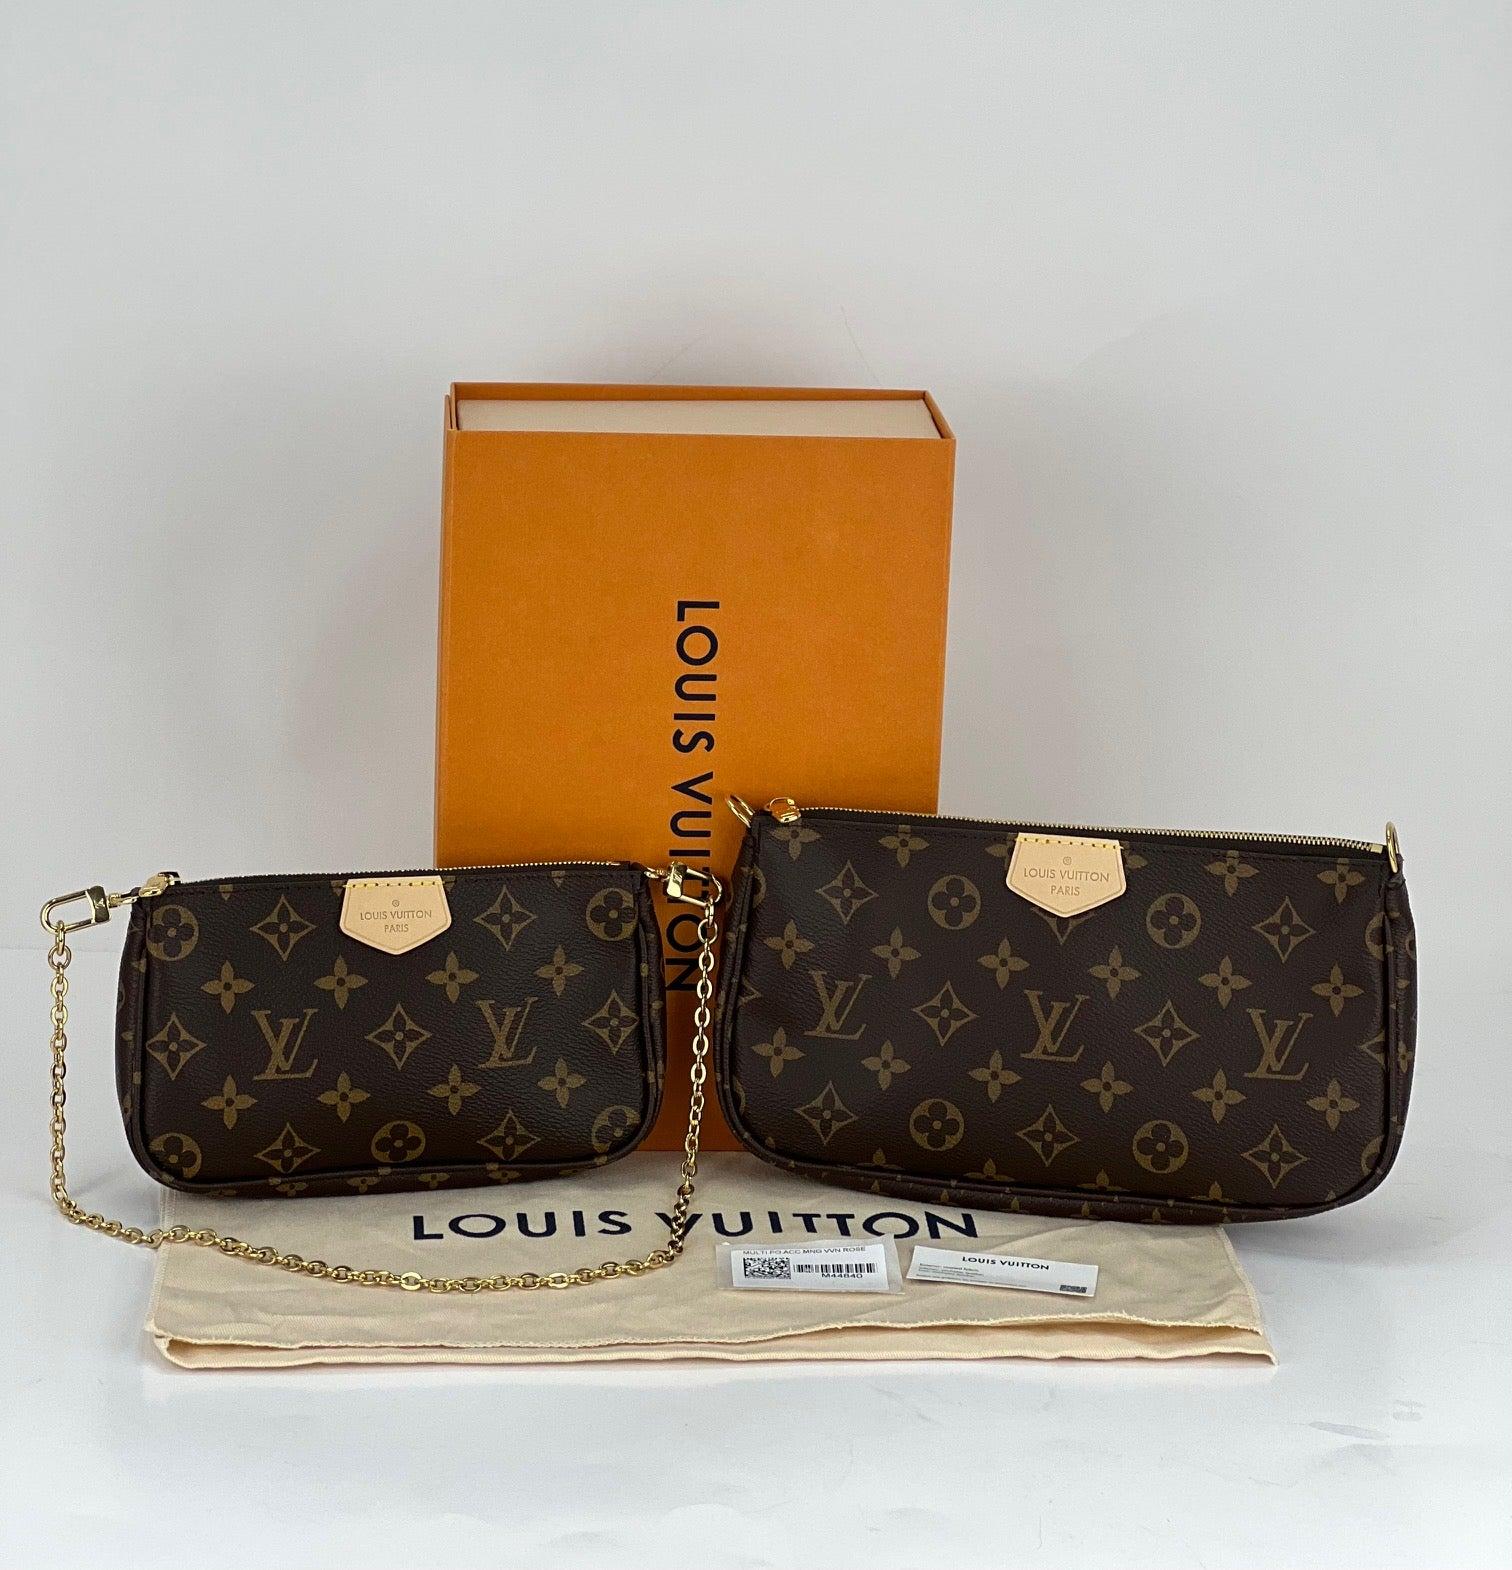 Pre-Owned  100% Authentic
LOUIS VUITTON Multi Pochette Accessoires
Monogram Bag
RATING: A...excellent, near mint, only
slight signs of wear
MATERIAL: monogram canvas, leather trim 
HANDLE:  LV golden chain that attaches
to claw hooks in smaller